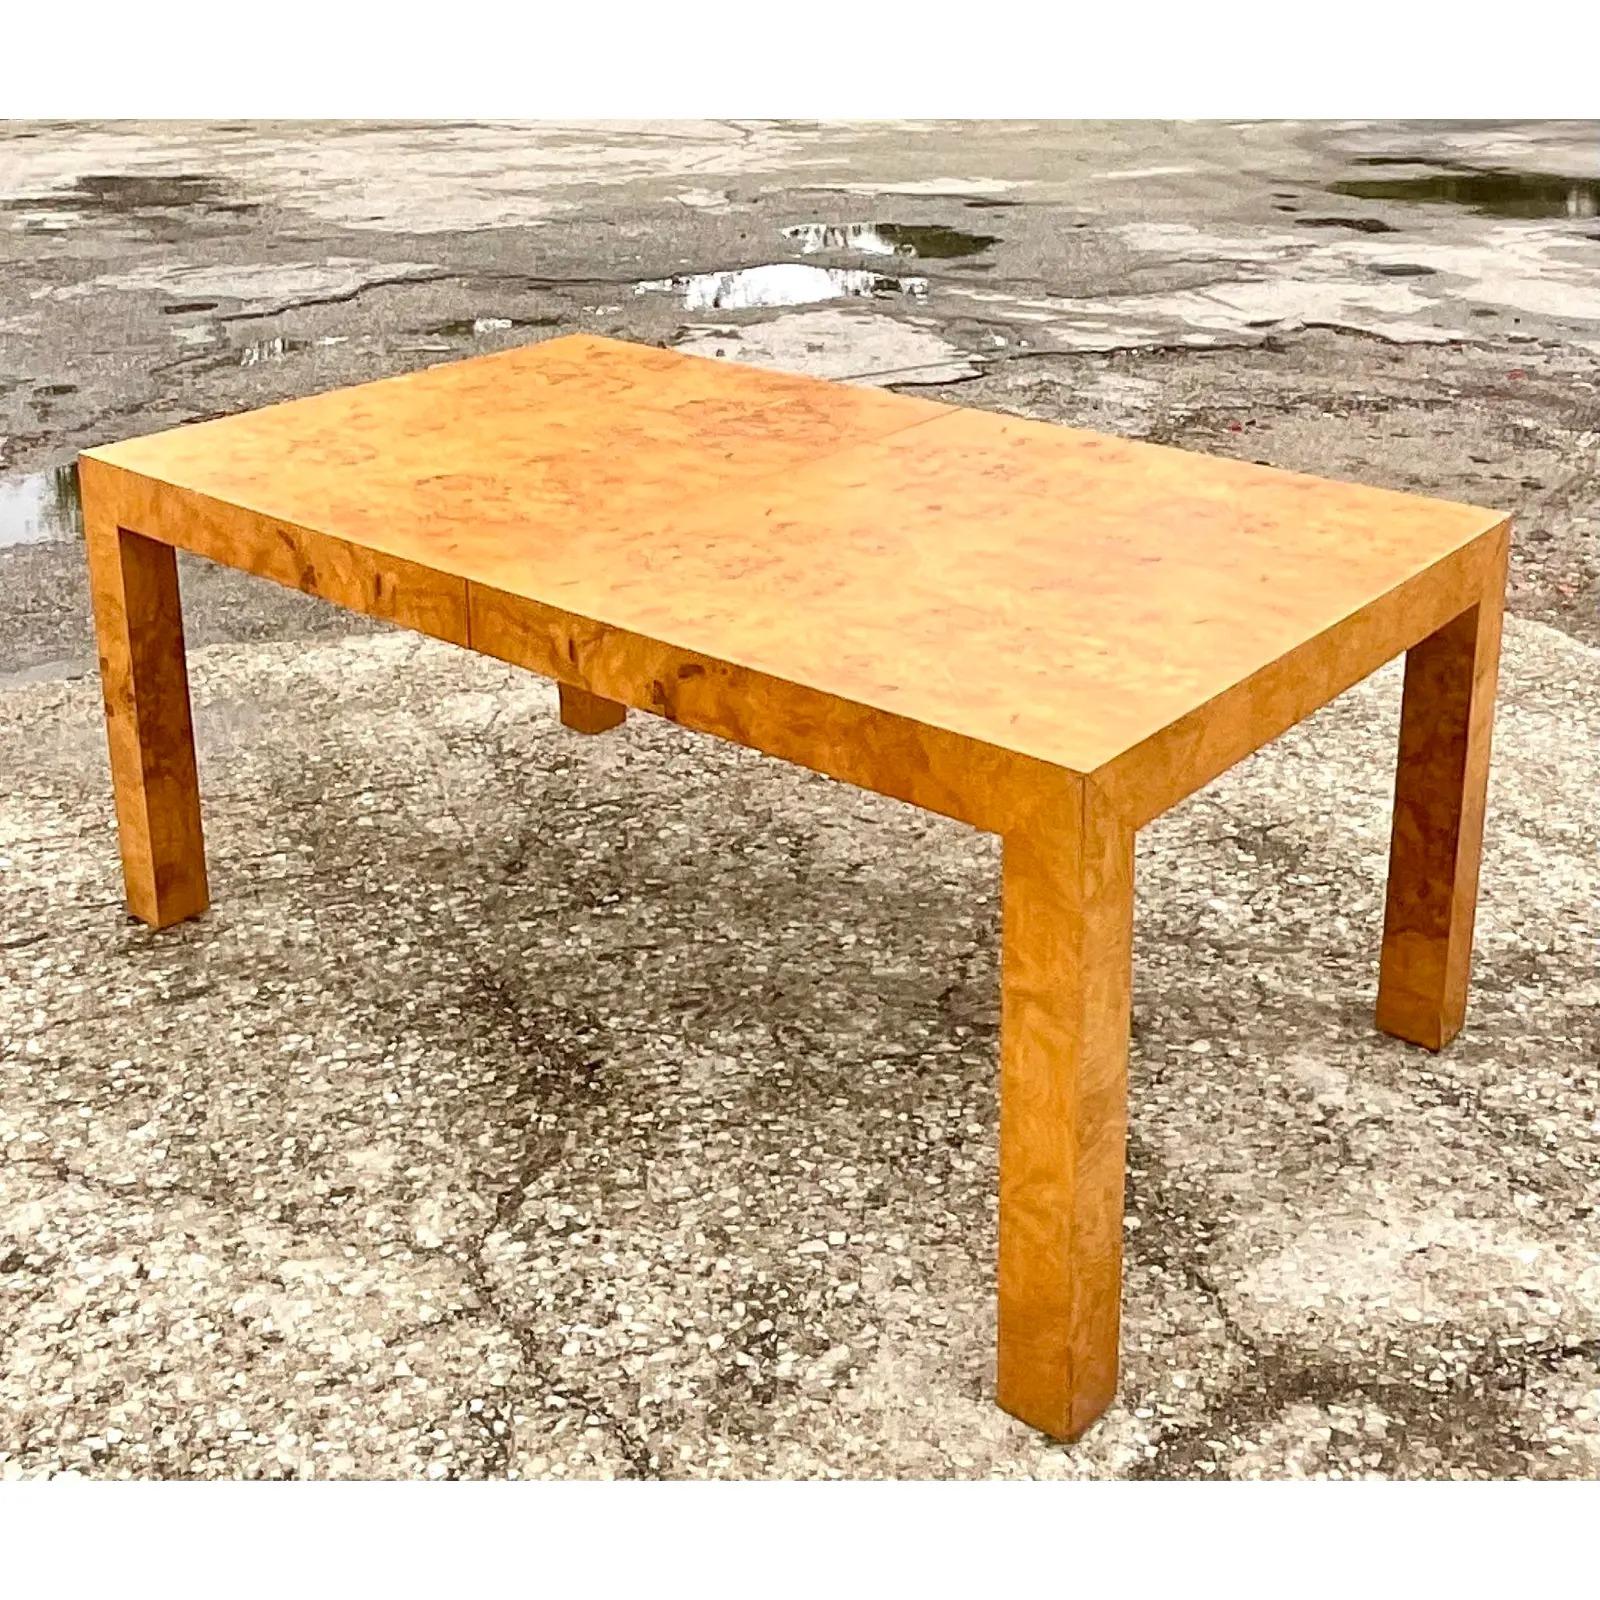 Incredible vintage MCM lane dining table. Beautiful book matched Burl wood makes this a really striking addition to any décor. Two large leaves make it an enormous table for entertaining.